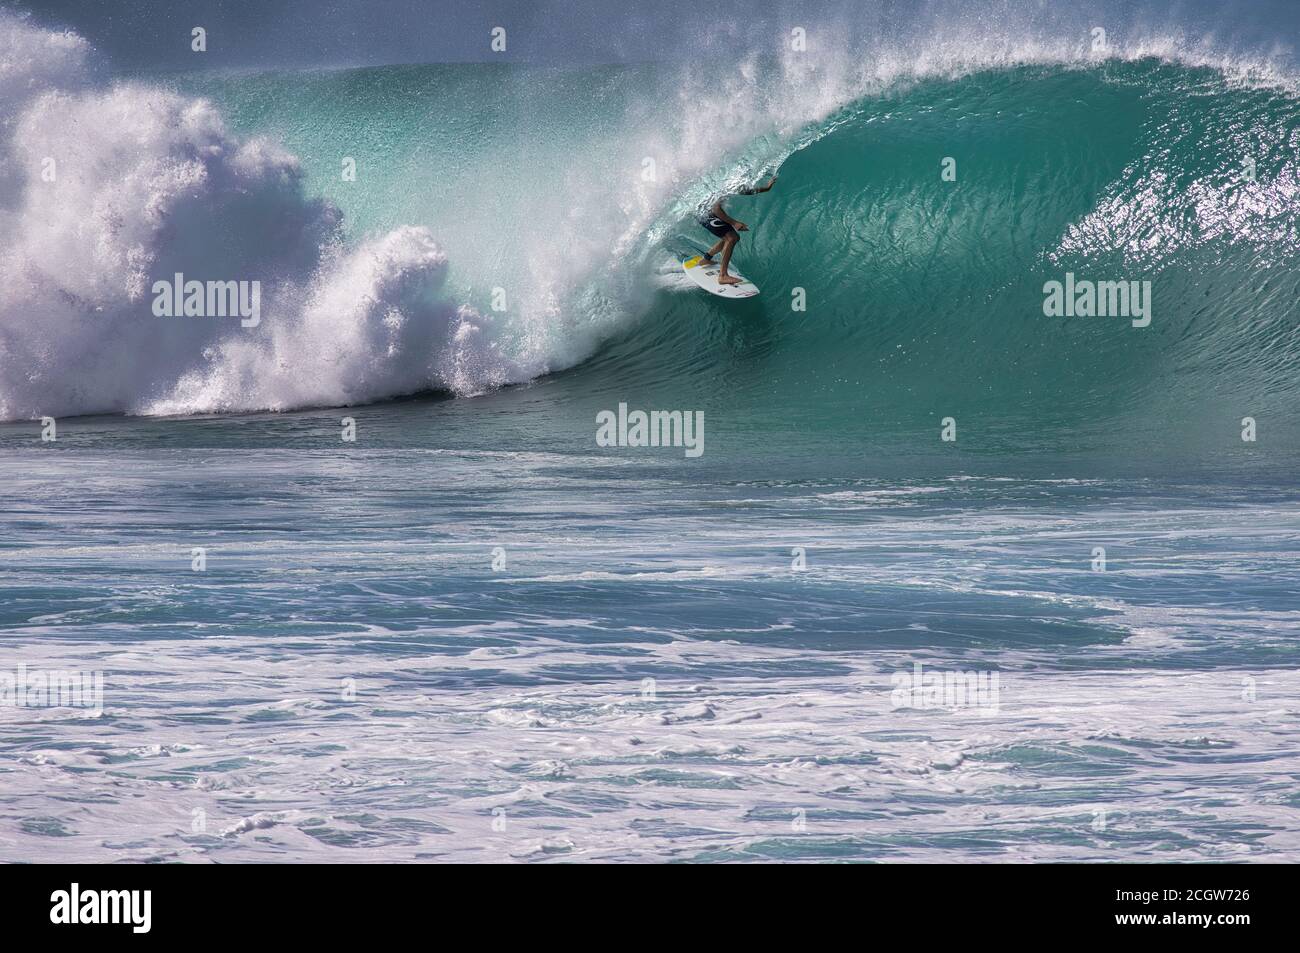 Unrecognizable surfer deep in the curl of a massive North shore oahu wave. Stock Photo